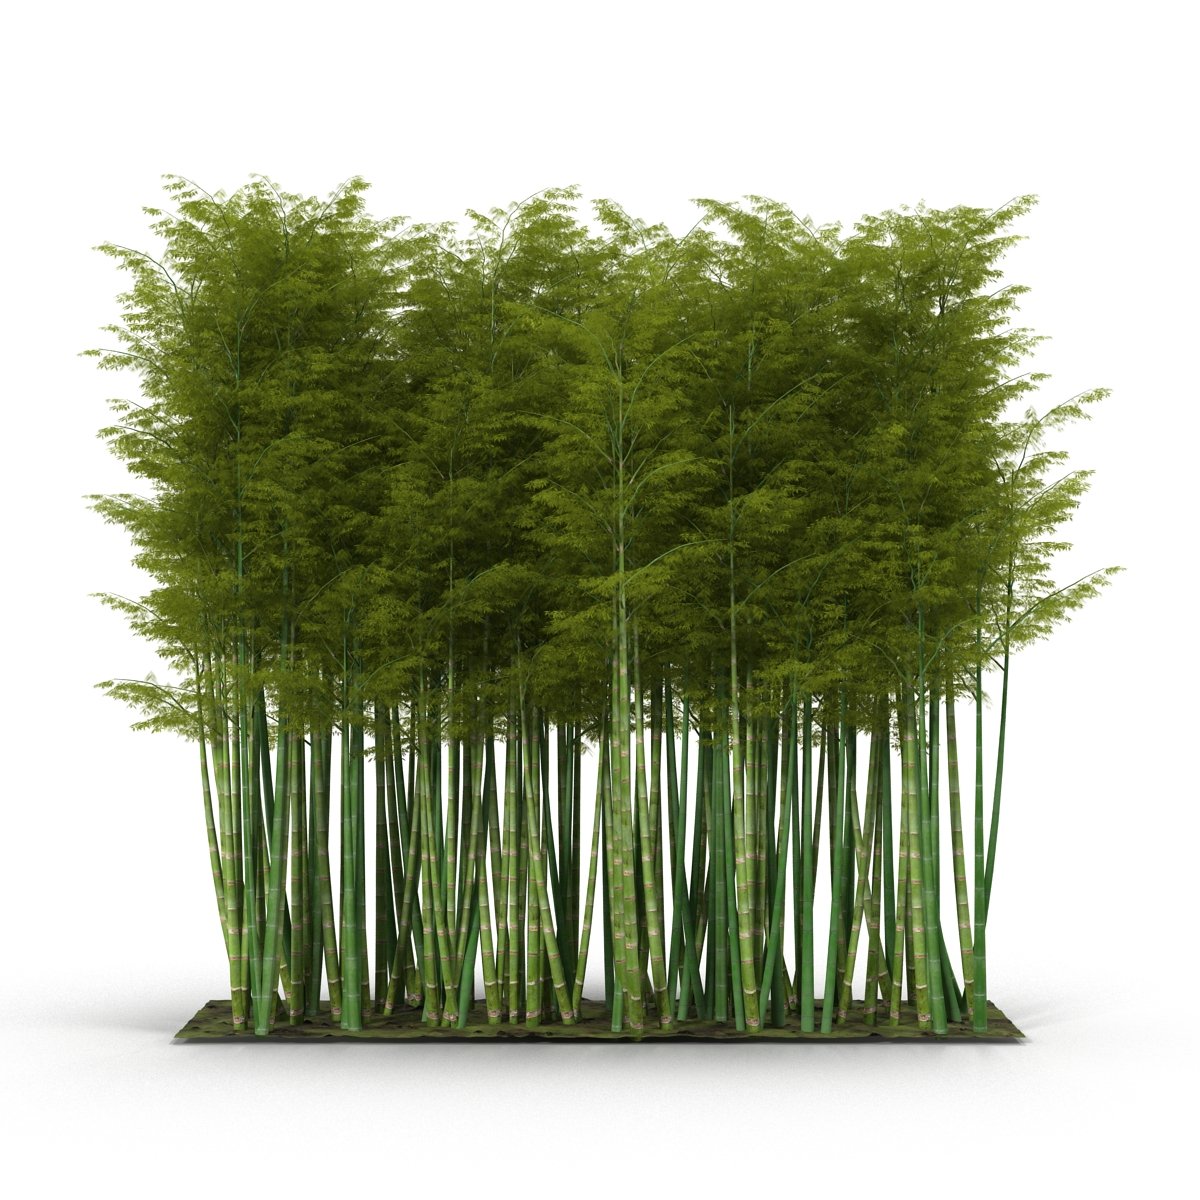 Bunch of tall green bamboo trees on a white background.